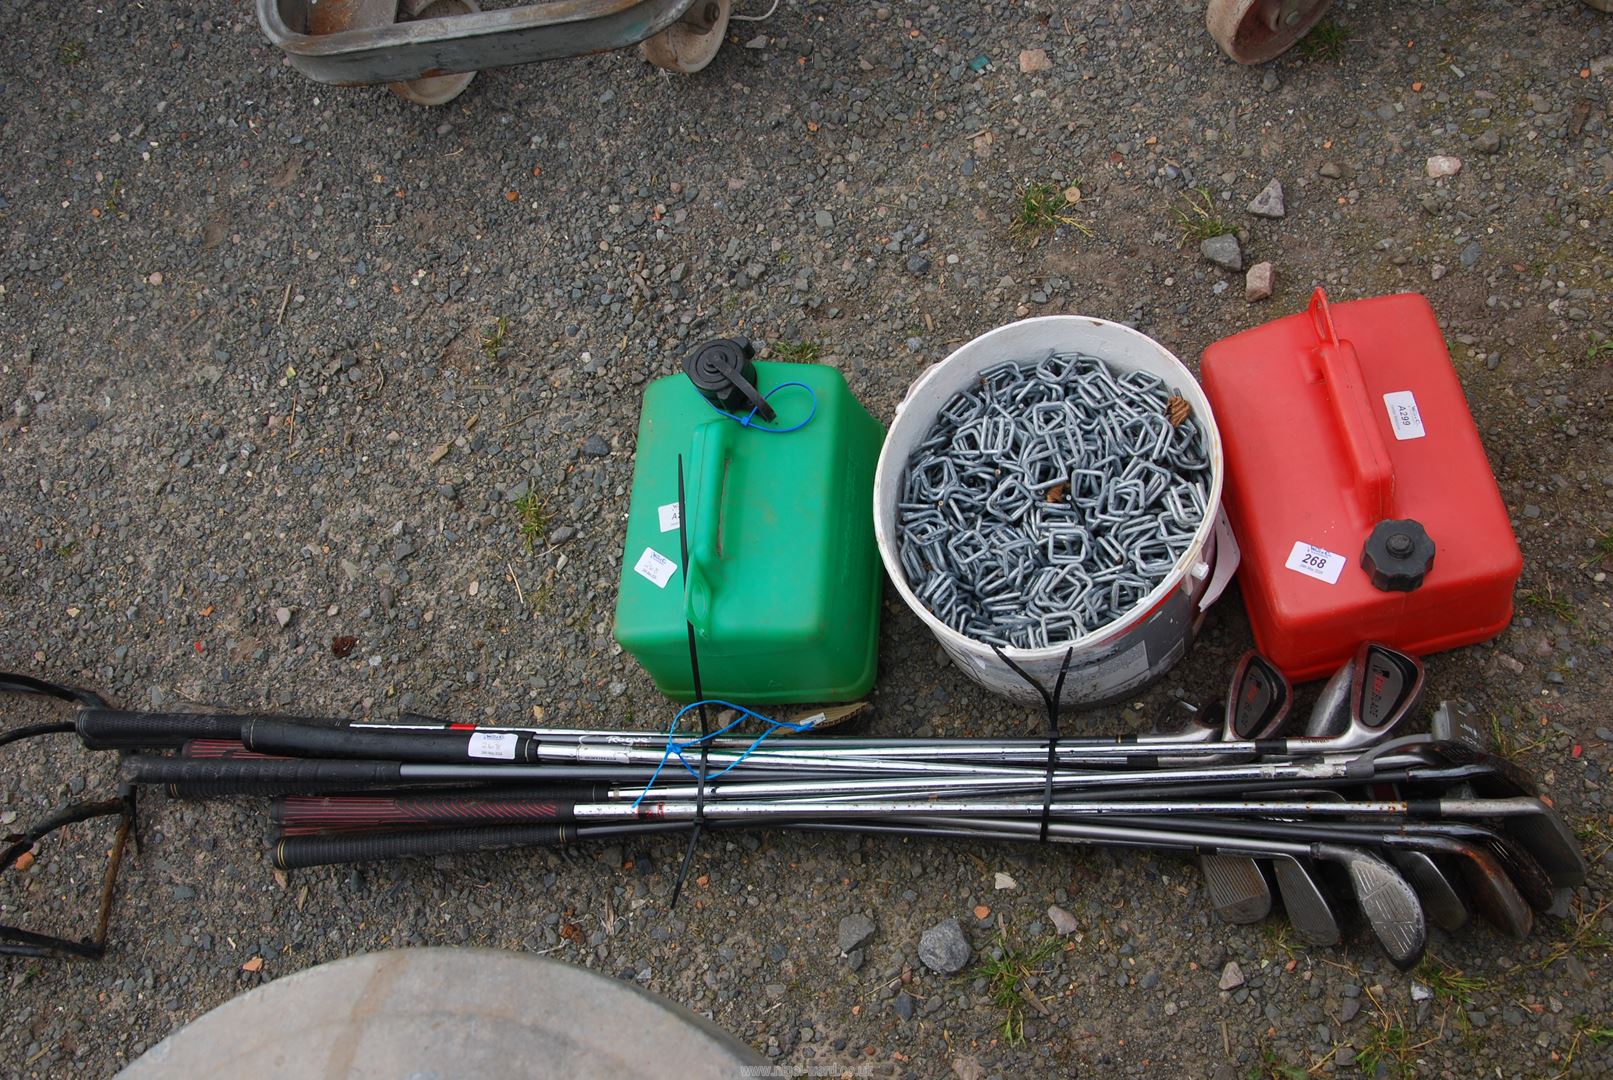 Two plastic fuel cans, a quantity of golf clubs and a tub of fencing clips.